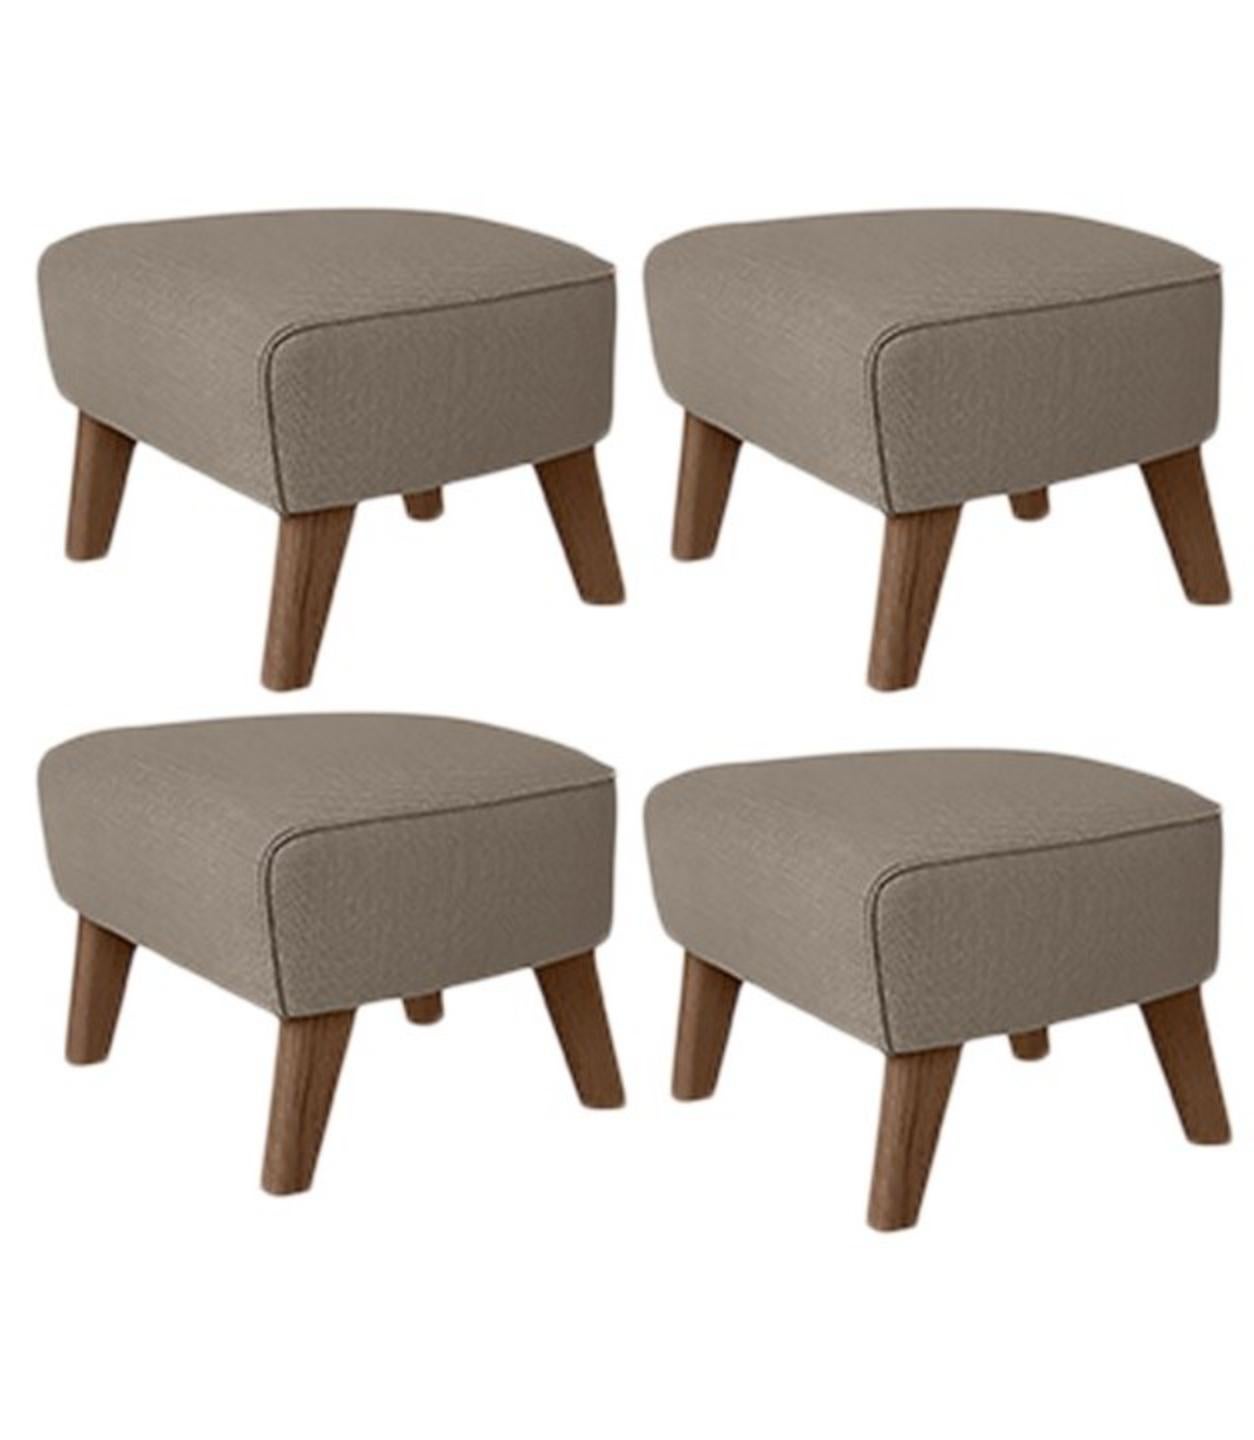 Set of 4 dark beige, smoked oak Raf Simons Vidar 3 My Own Chair Footstool by Lassen
Dimensions: W 56 x D 58 x H 40 cm 
Materials: Textile, oak
Also available: other colors available.

The My Own Chair Footstool has been designed in the same